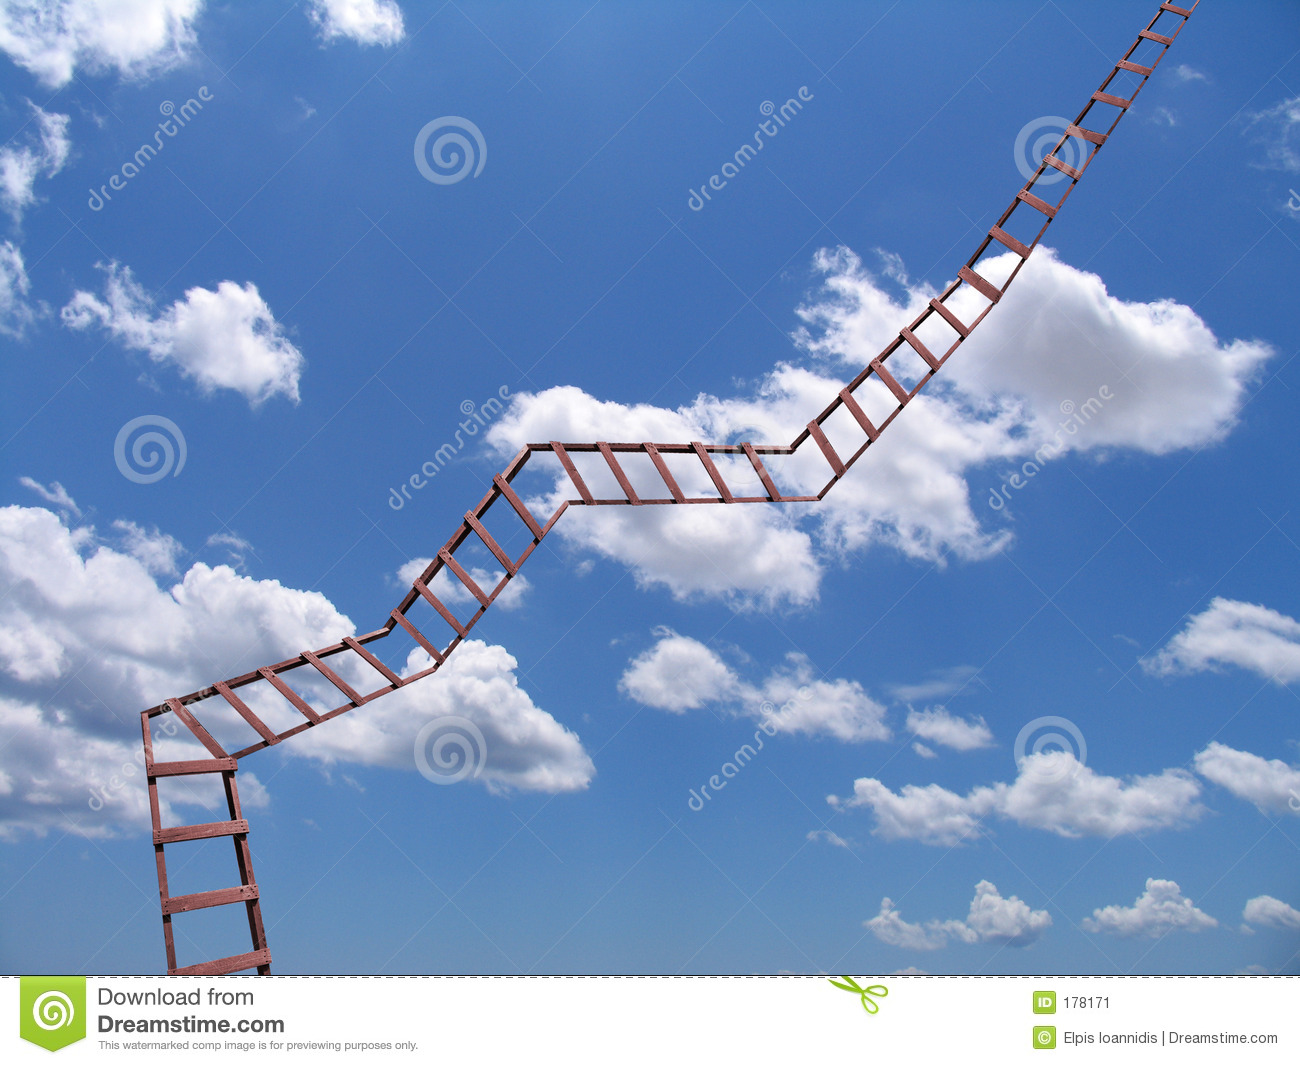 Ladder To Heaven Stock Image   Image  178171